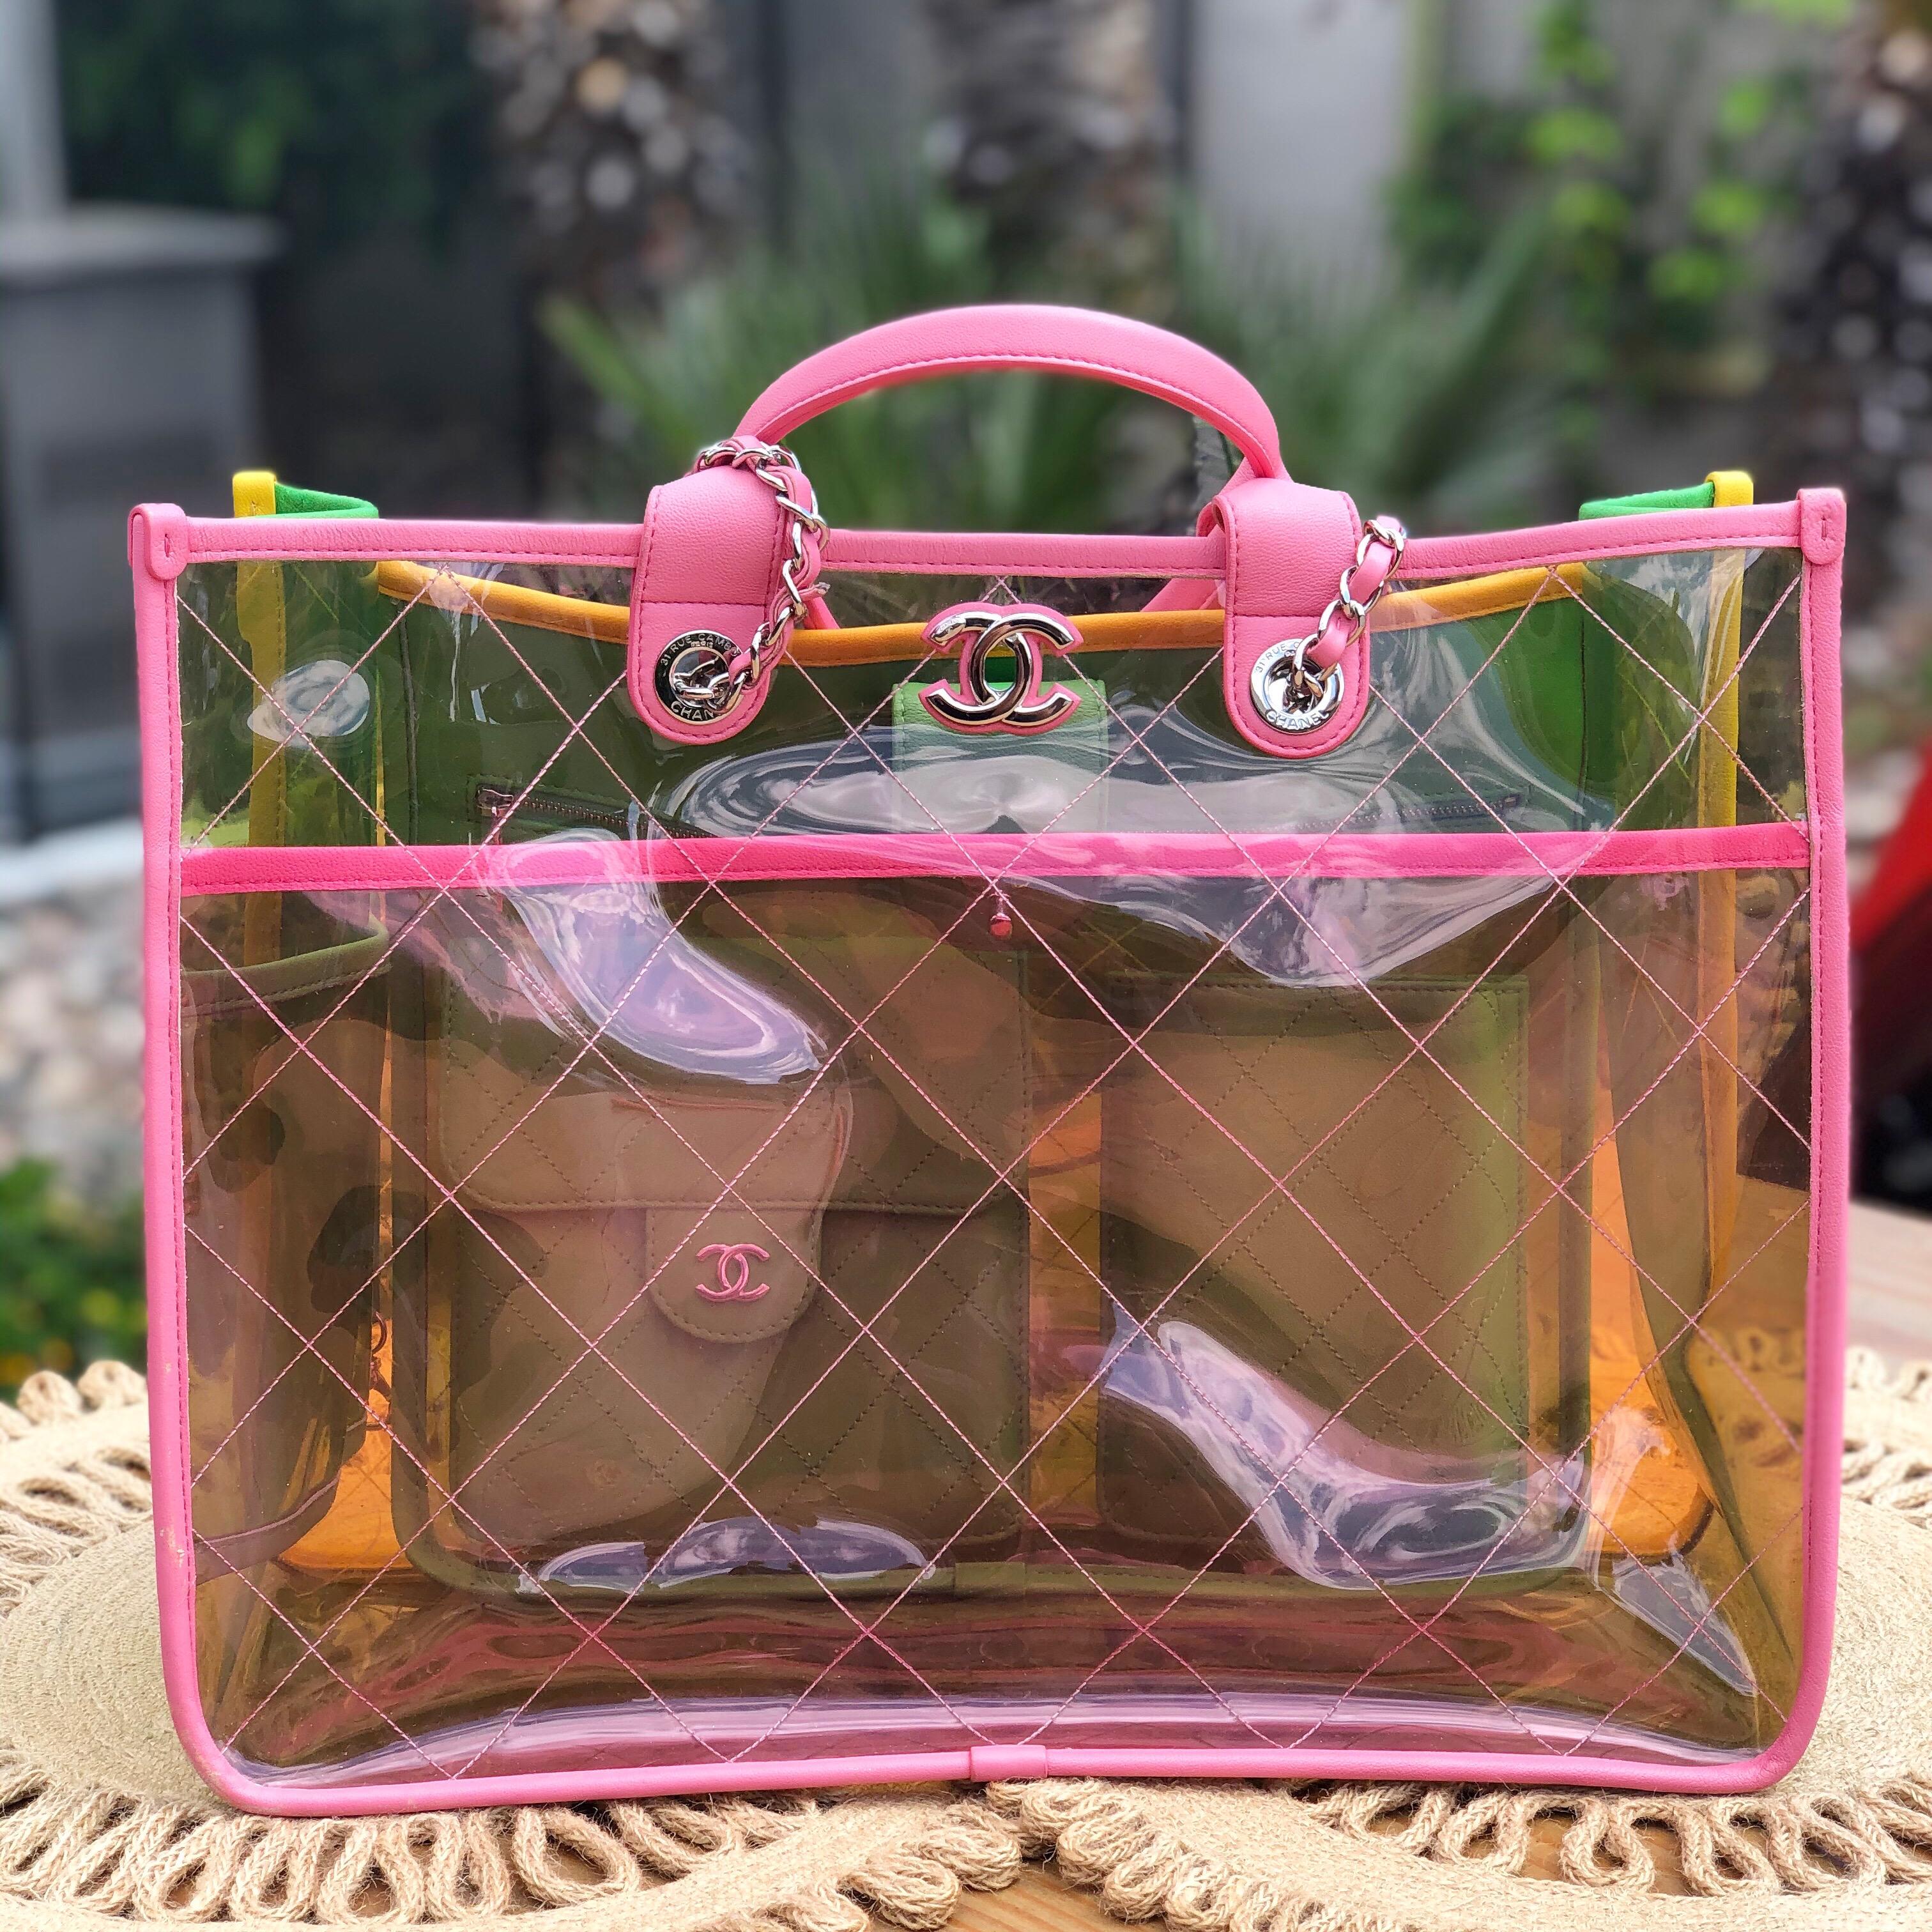 Hello.... Chanel S/S '18 Coco Splash Tote! This lovely Chanel bag is in green and pink diamond stitched transparent multicolored PVC with silver-tone hardware, dual woven chain-link leather shoulder straps with top handles, yellow and pink leather